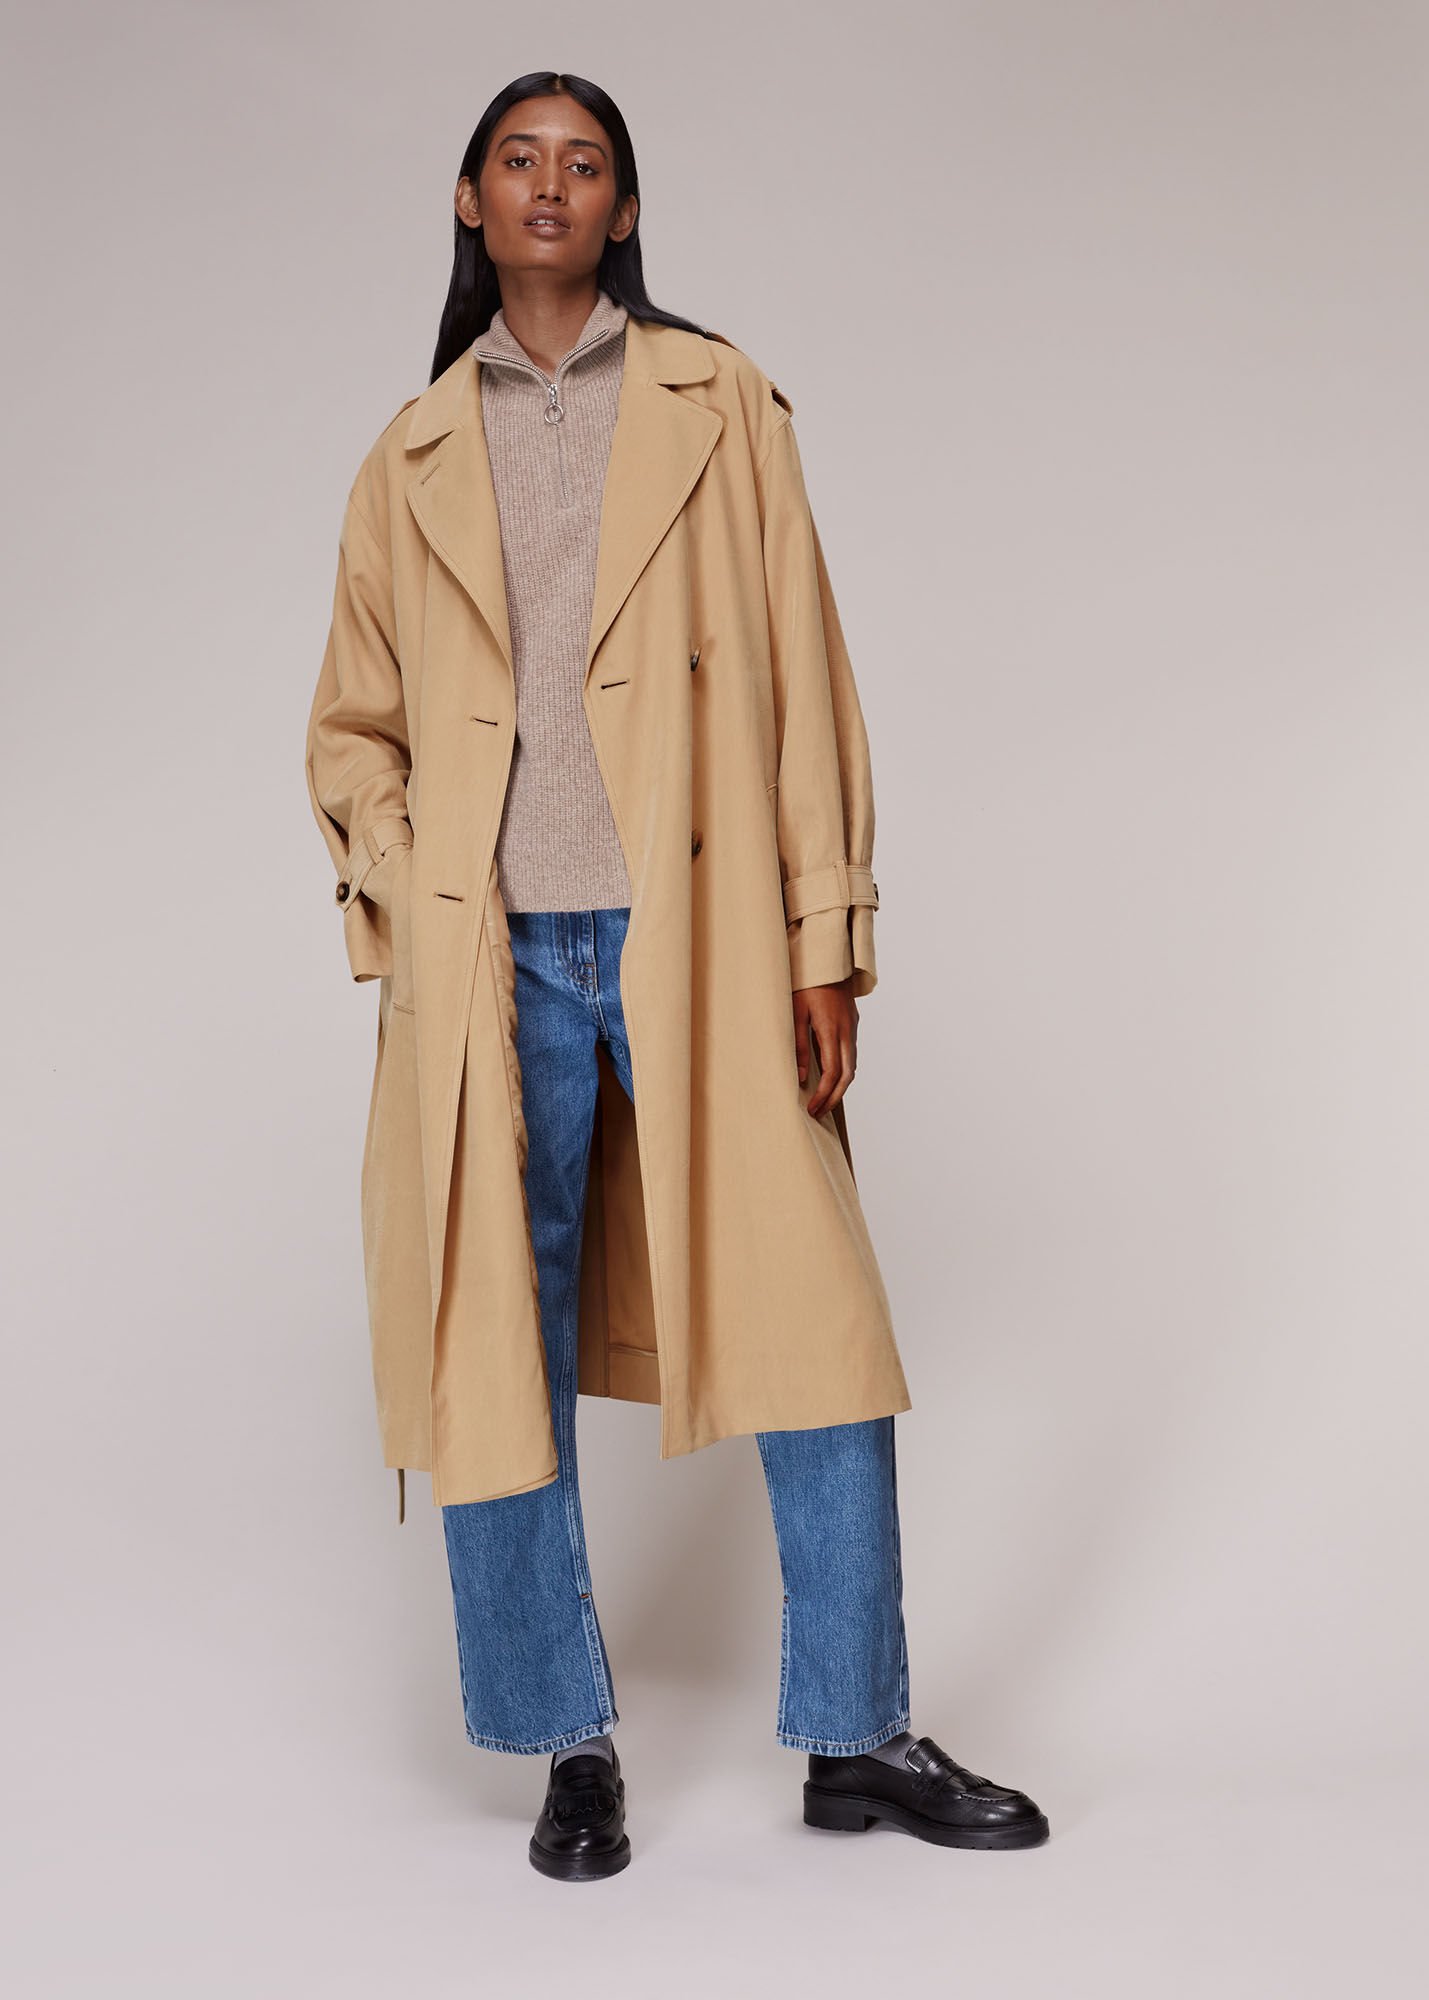 Whistles Riley Trench Coat